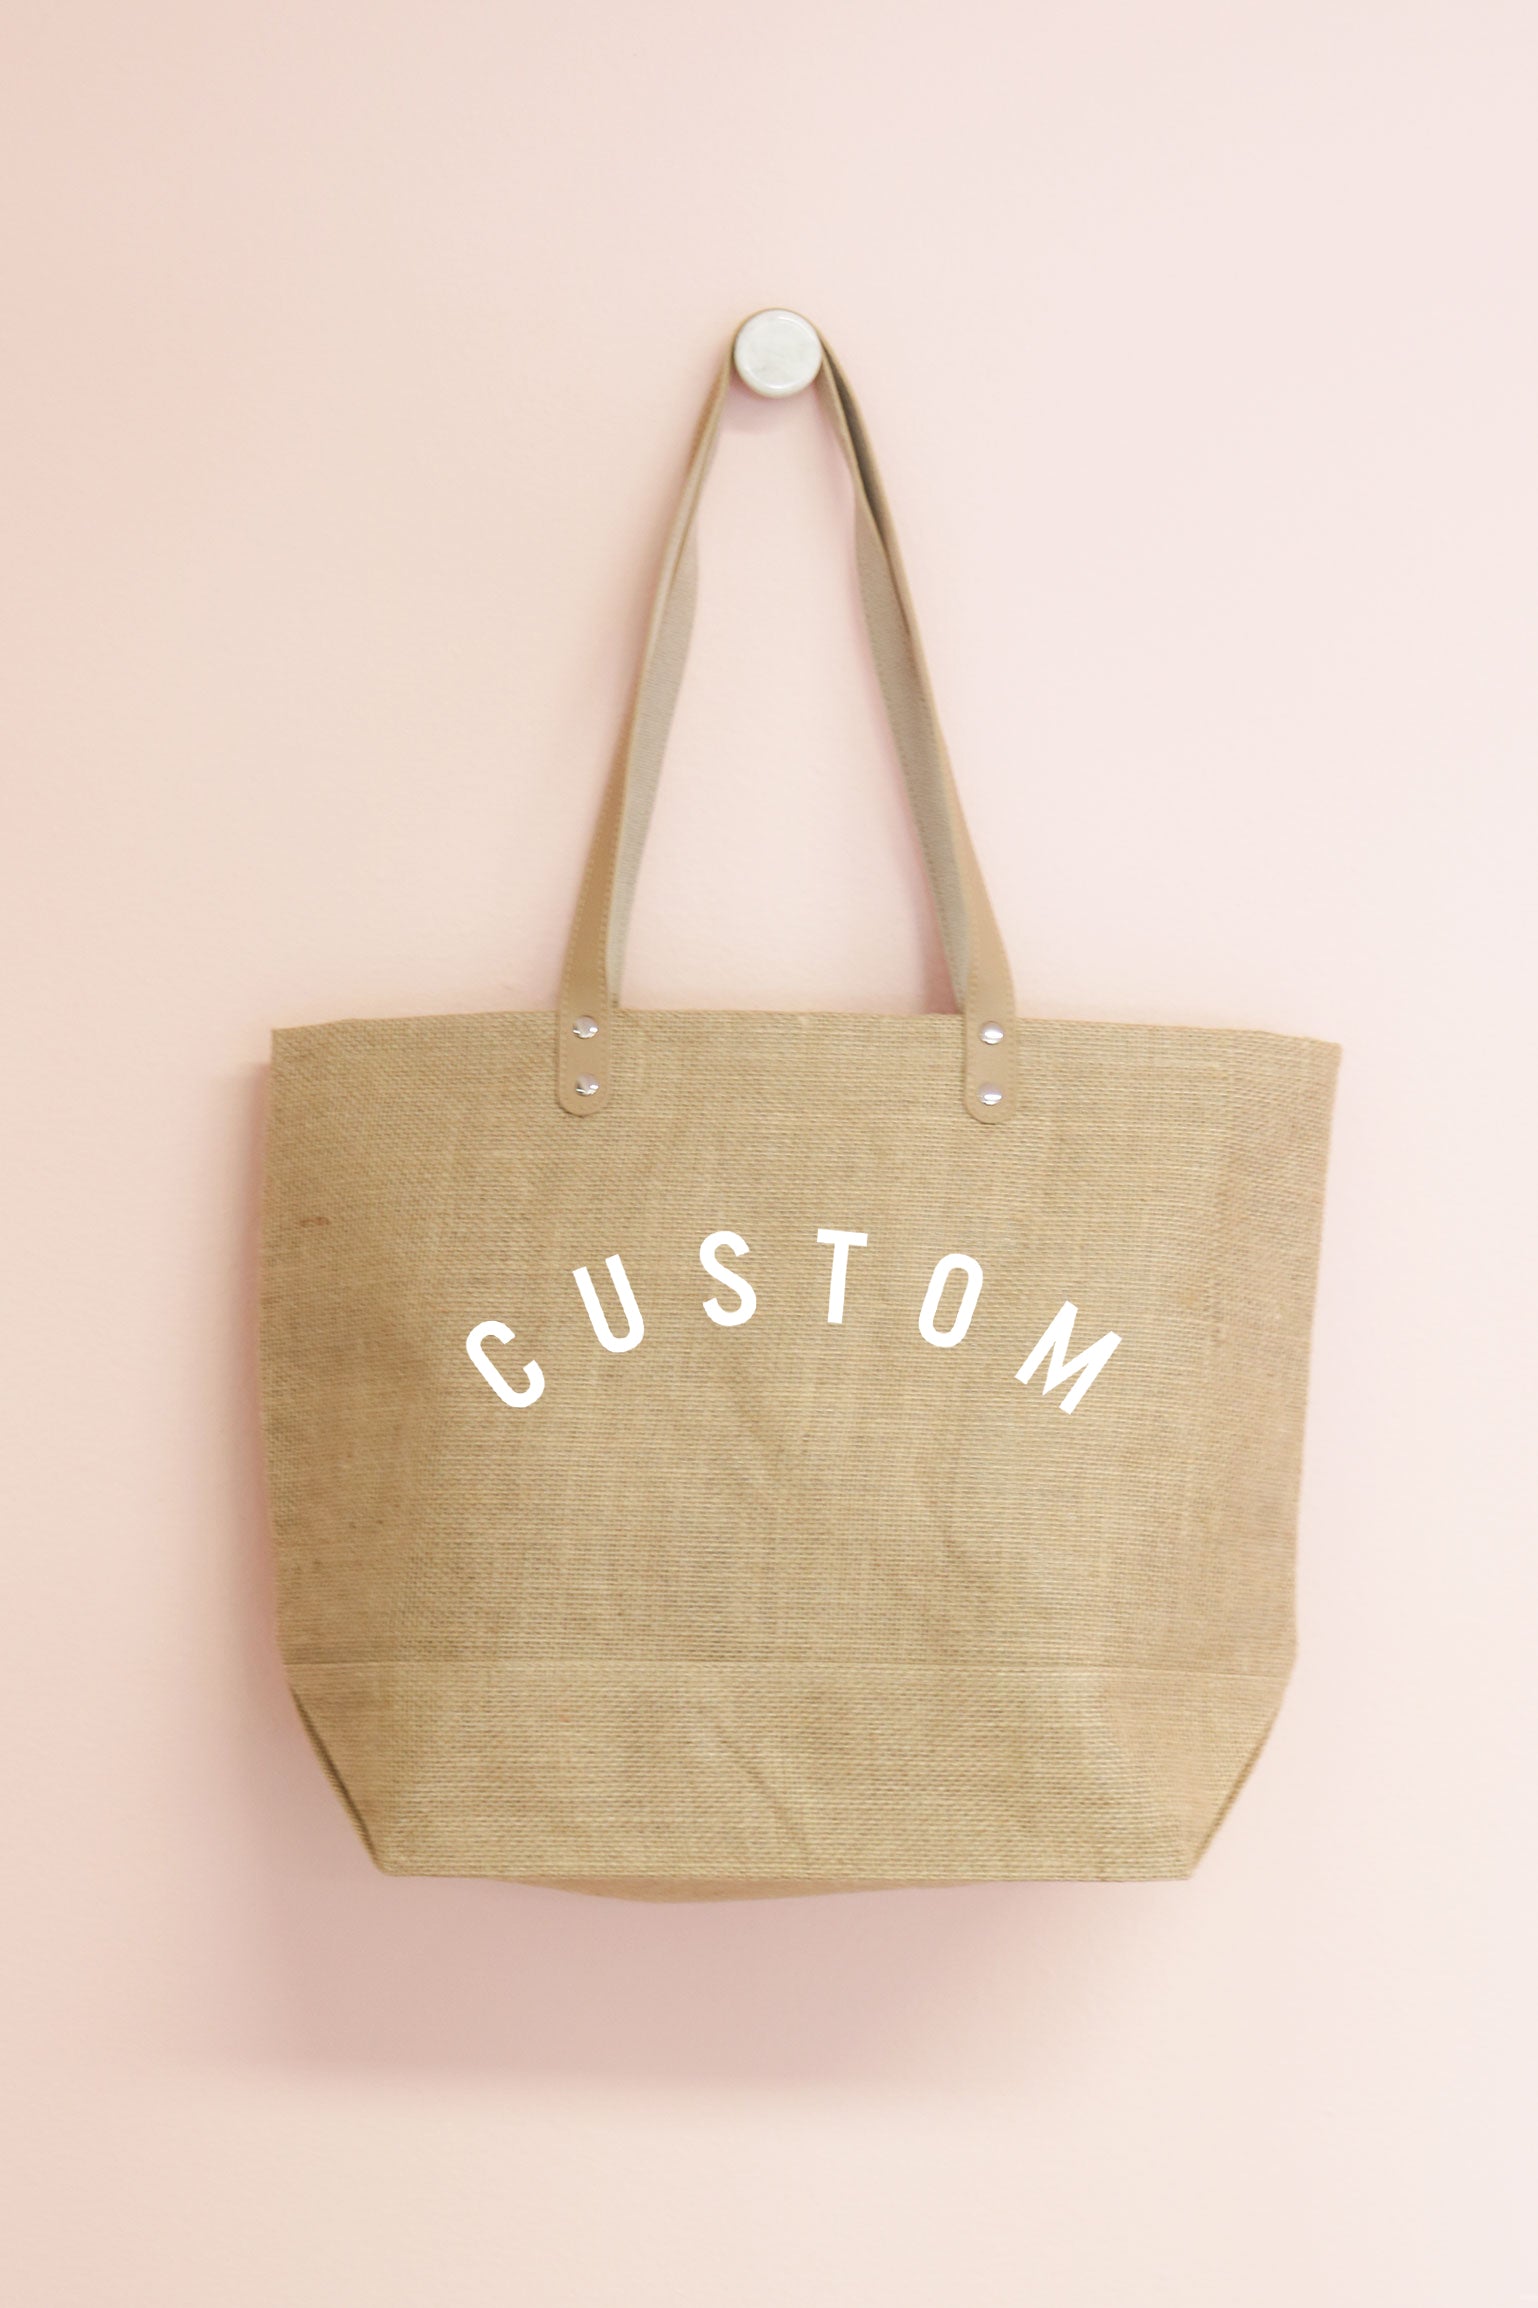 Leather Handle Personalized Canvas Tote Personalized Large 